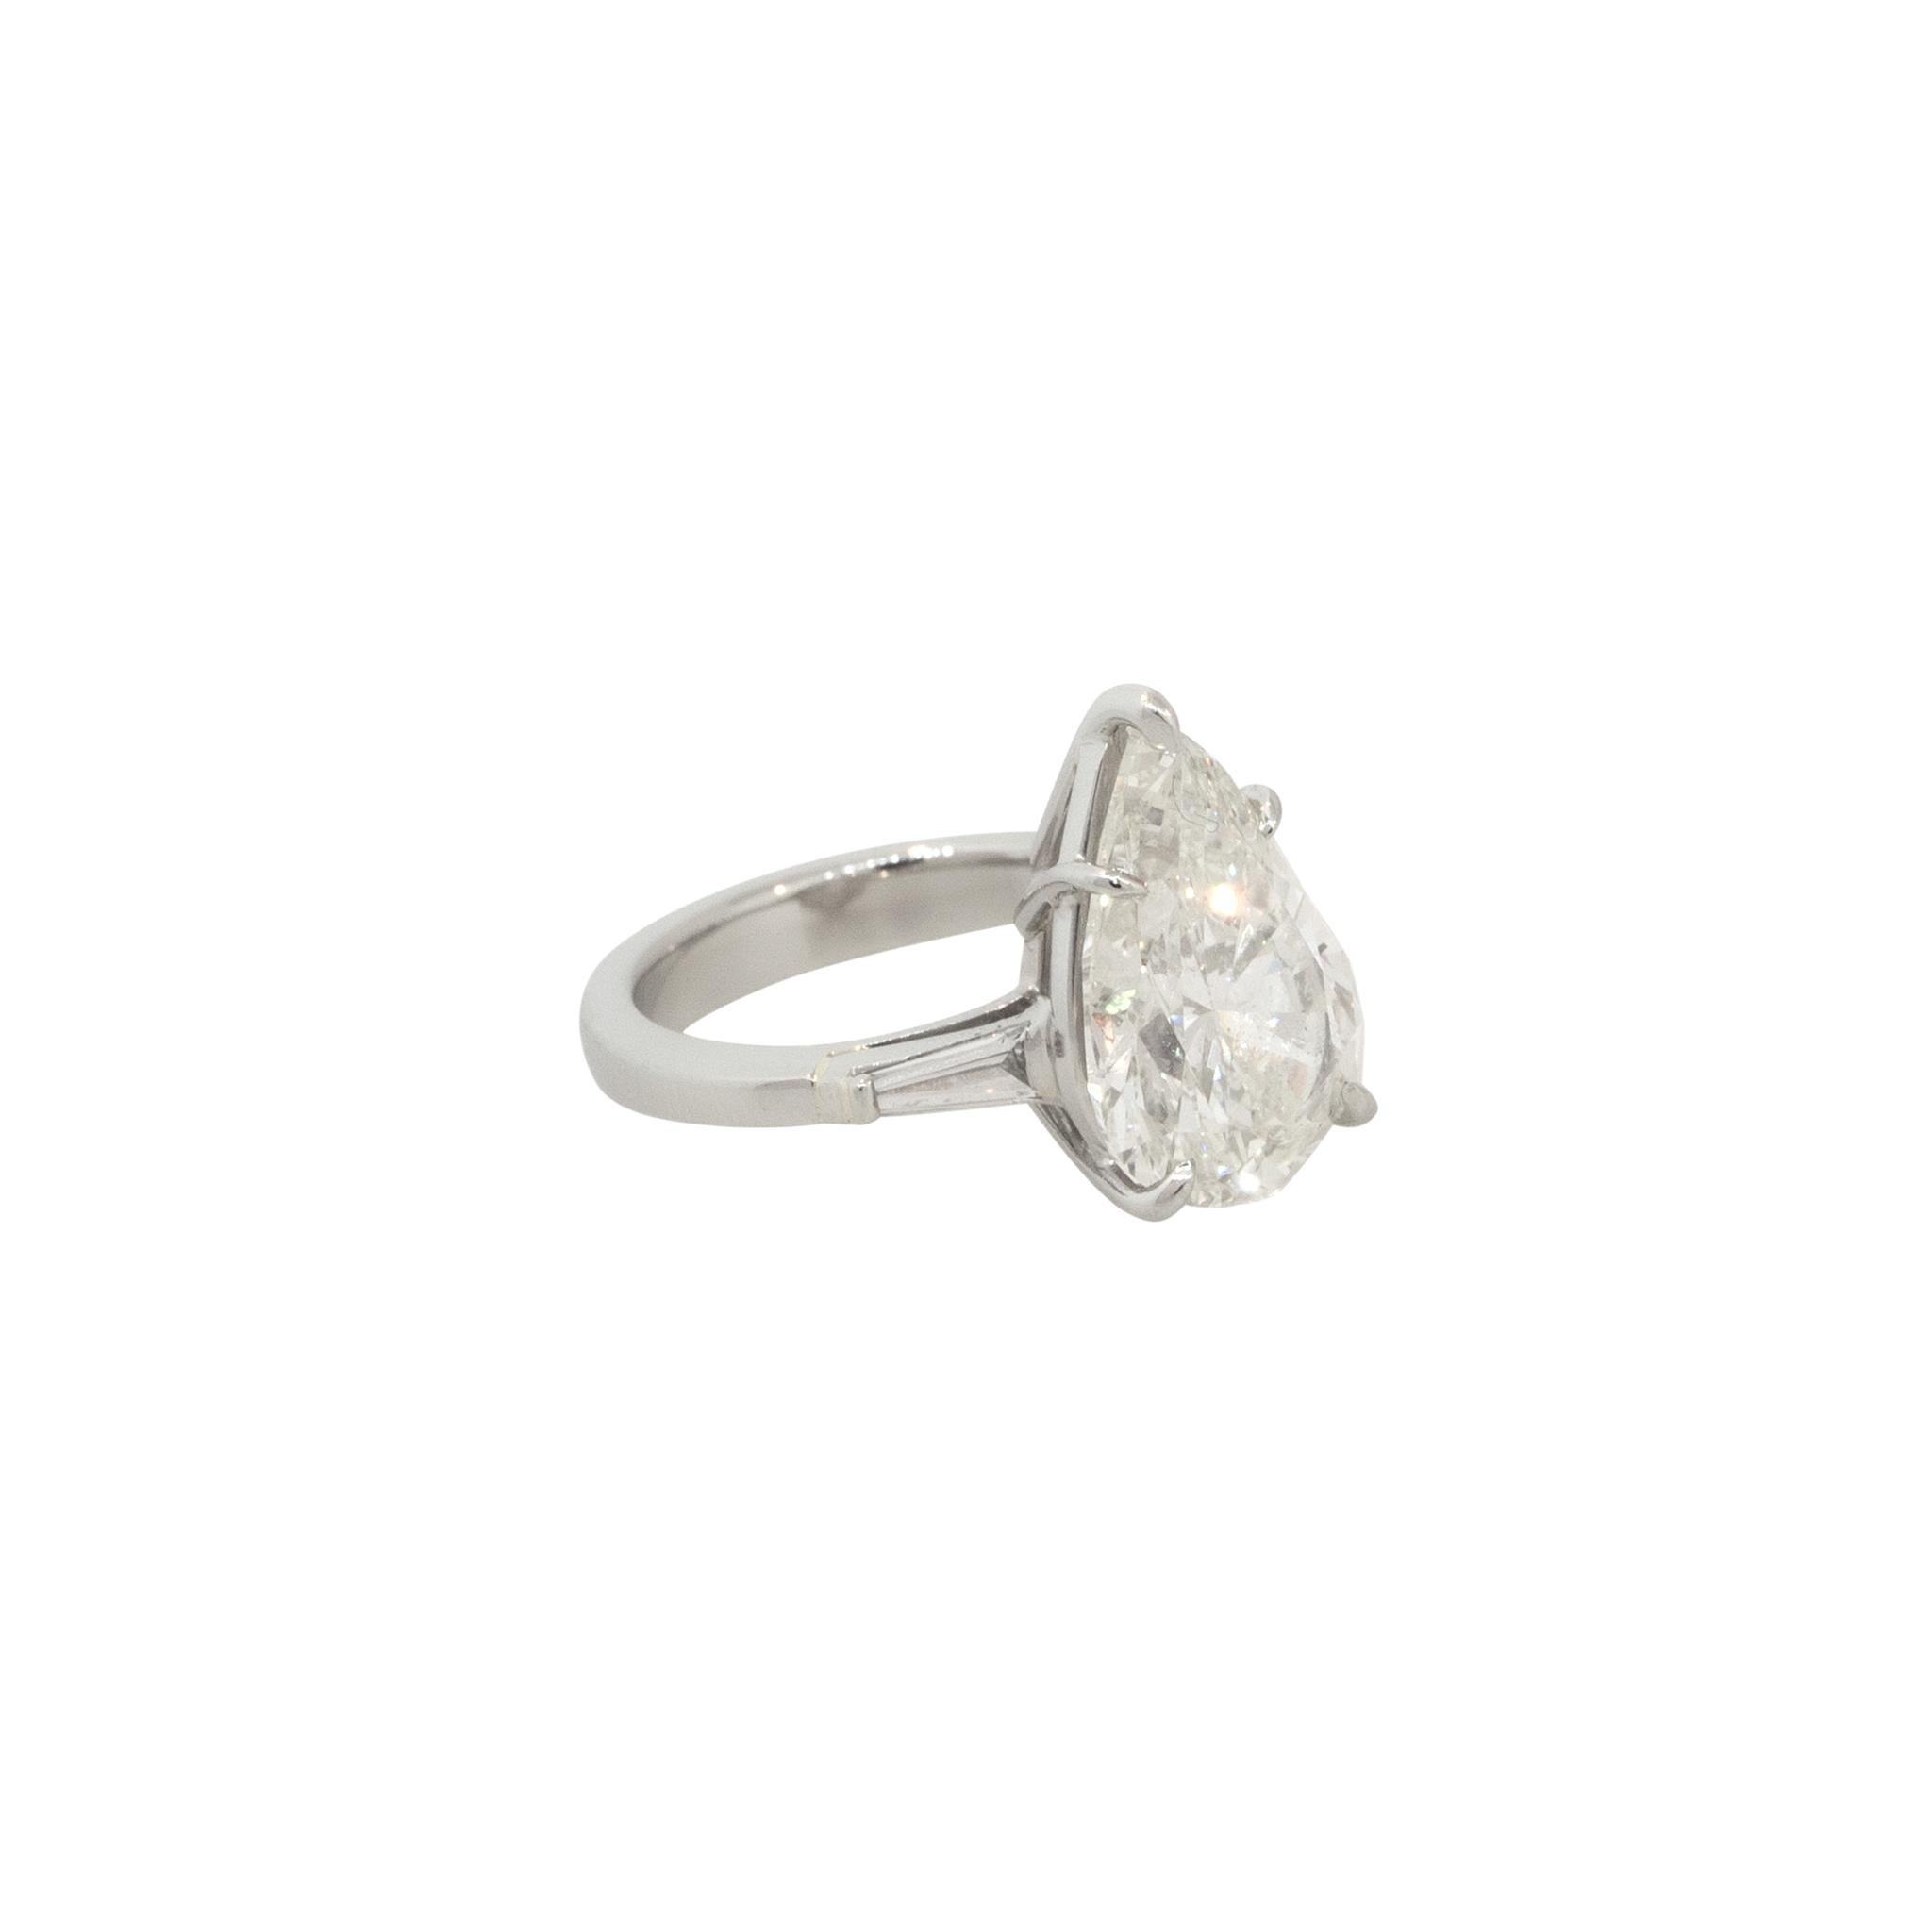 Pear Cut GIA Certified 5.60 Carat Pear Shape Diamond Engagement Ring Platinum In Stock For Sale